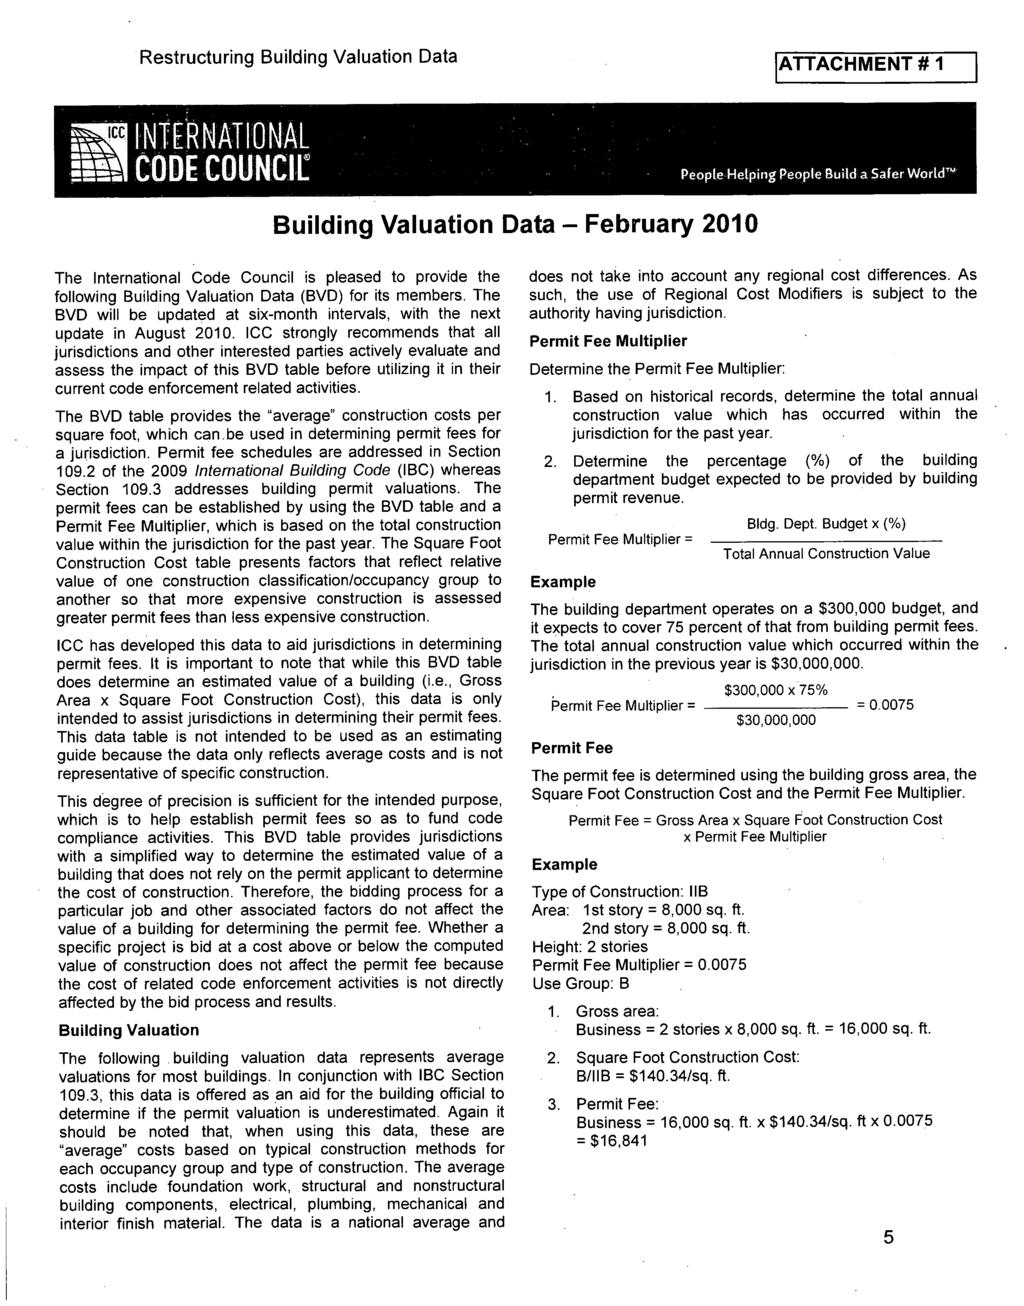 Restructuring Building Valuation Data ATTACHMENT # 1 Building Valuation Data - February 2010 People Helping People Build a Safer World'"' The International Code Council is pleased to provide the